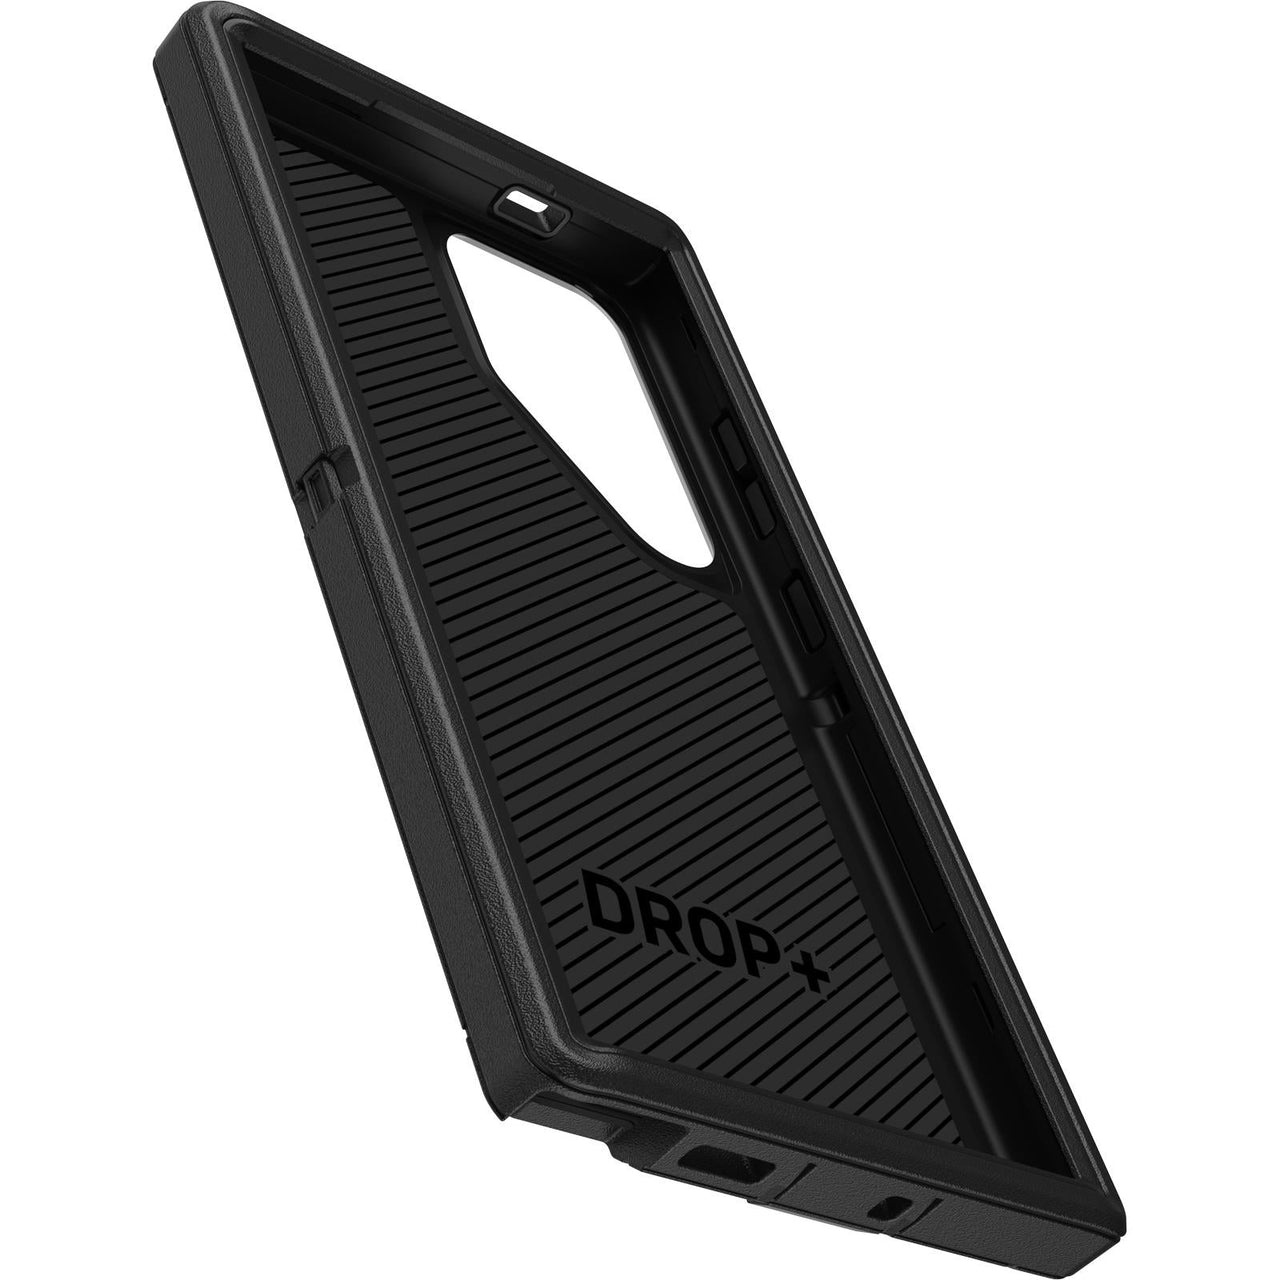 Otterbox Defender Case for Galaxy S24 Ultra - Black